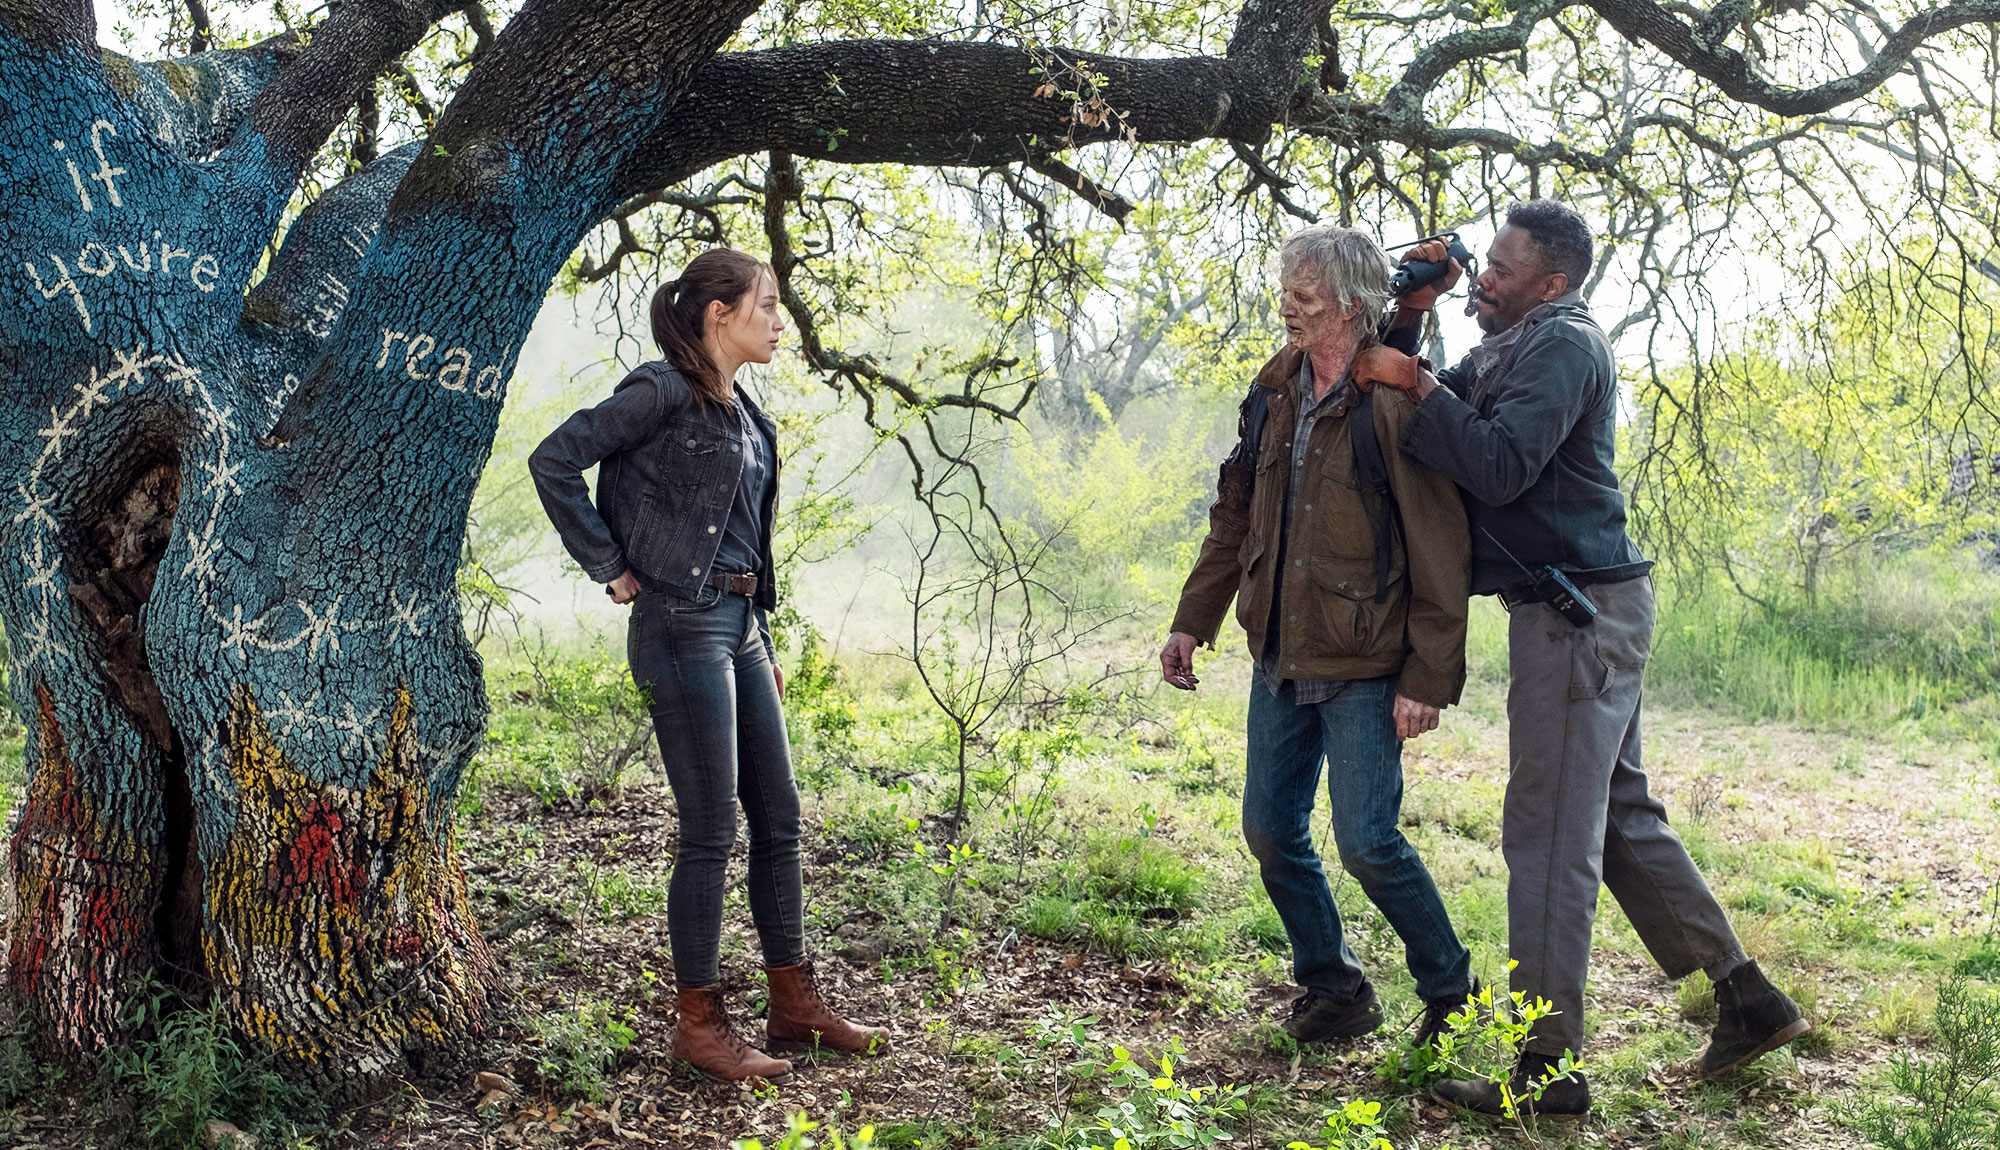 The Best Images From Fear the Walking Dead Episode 509